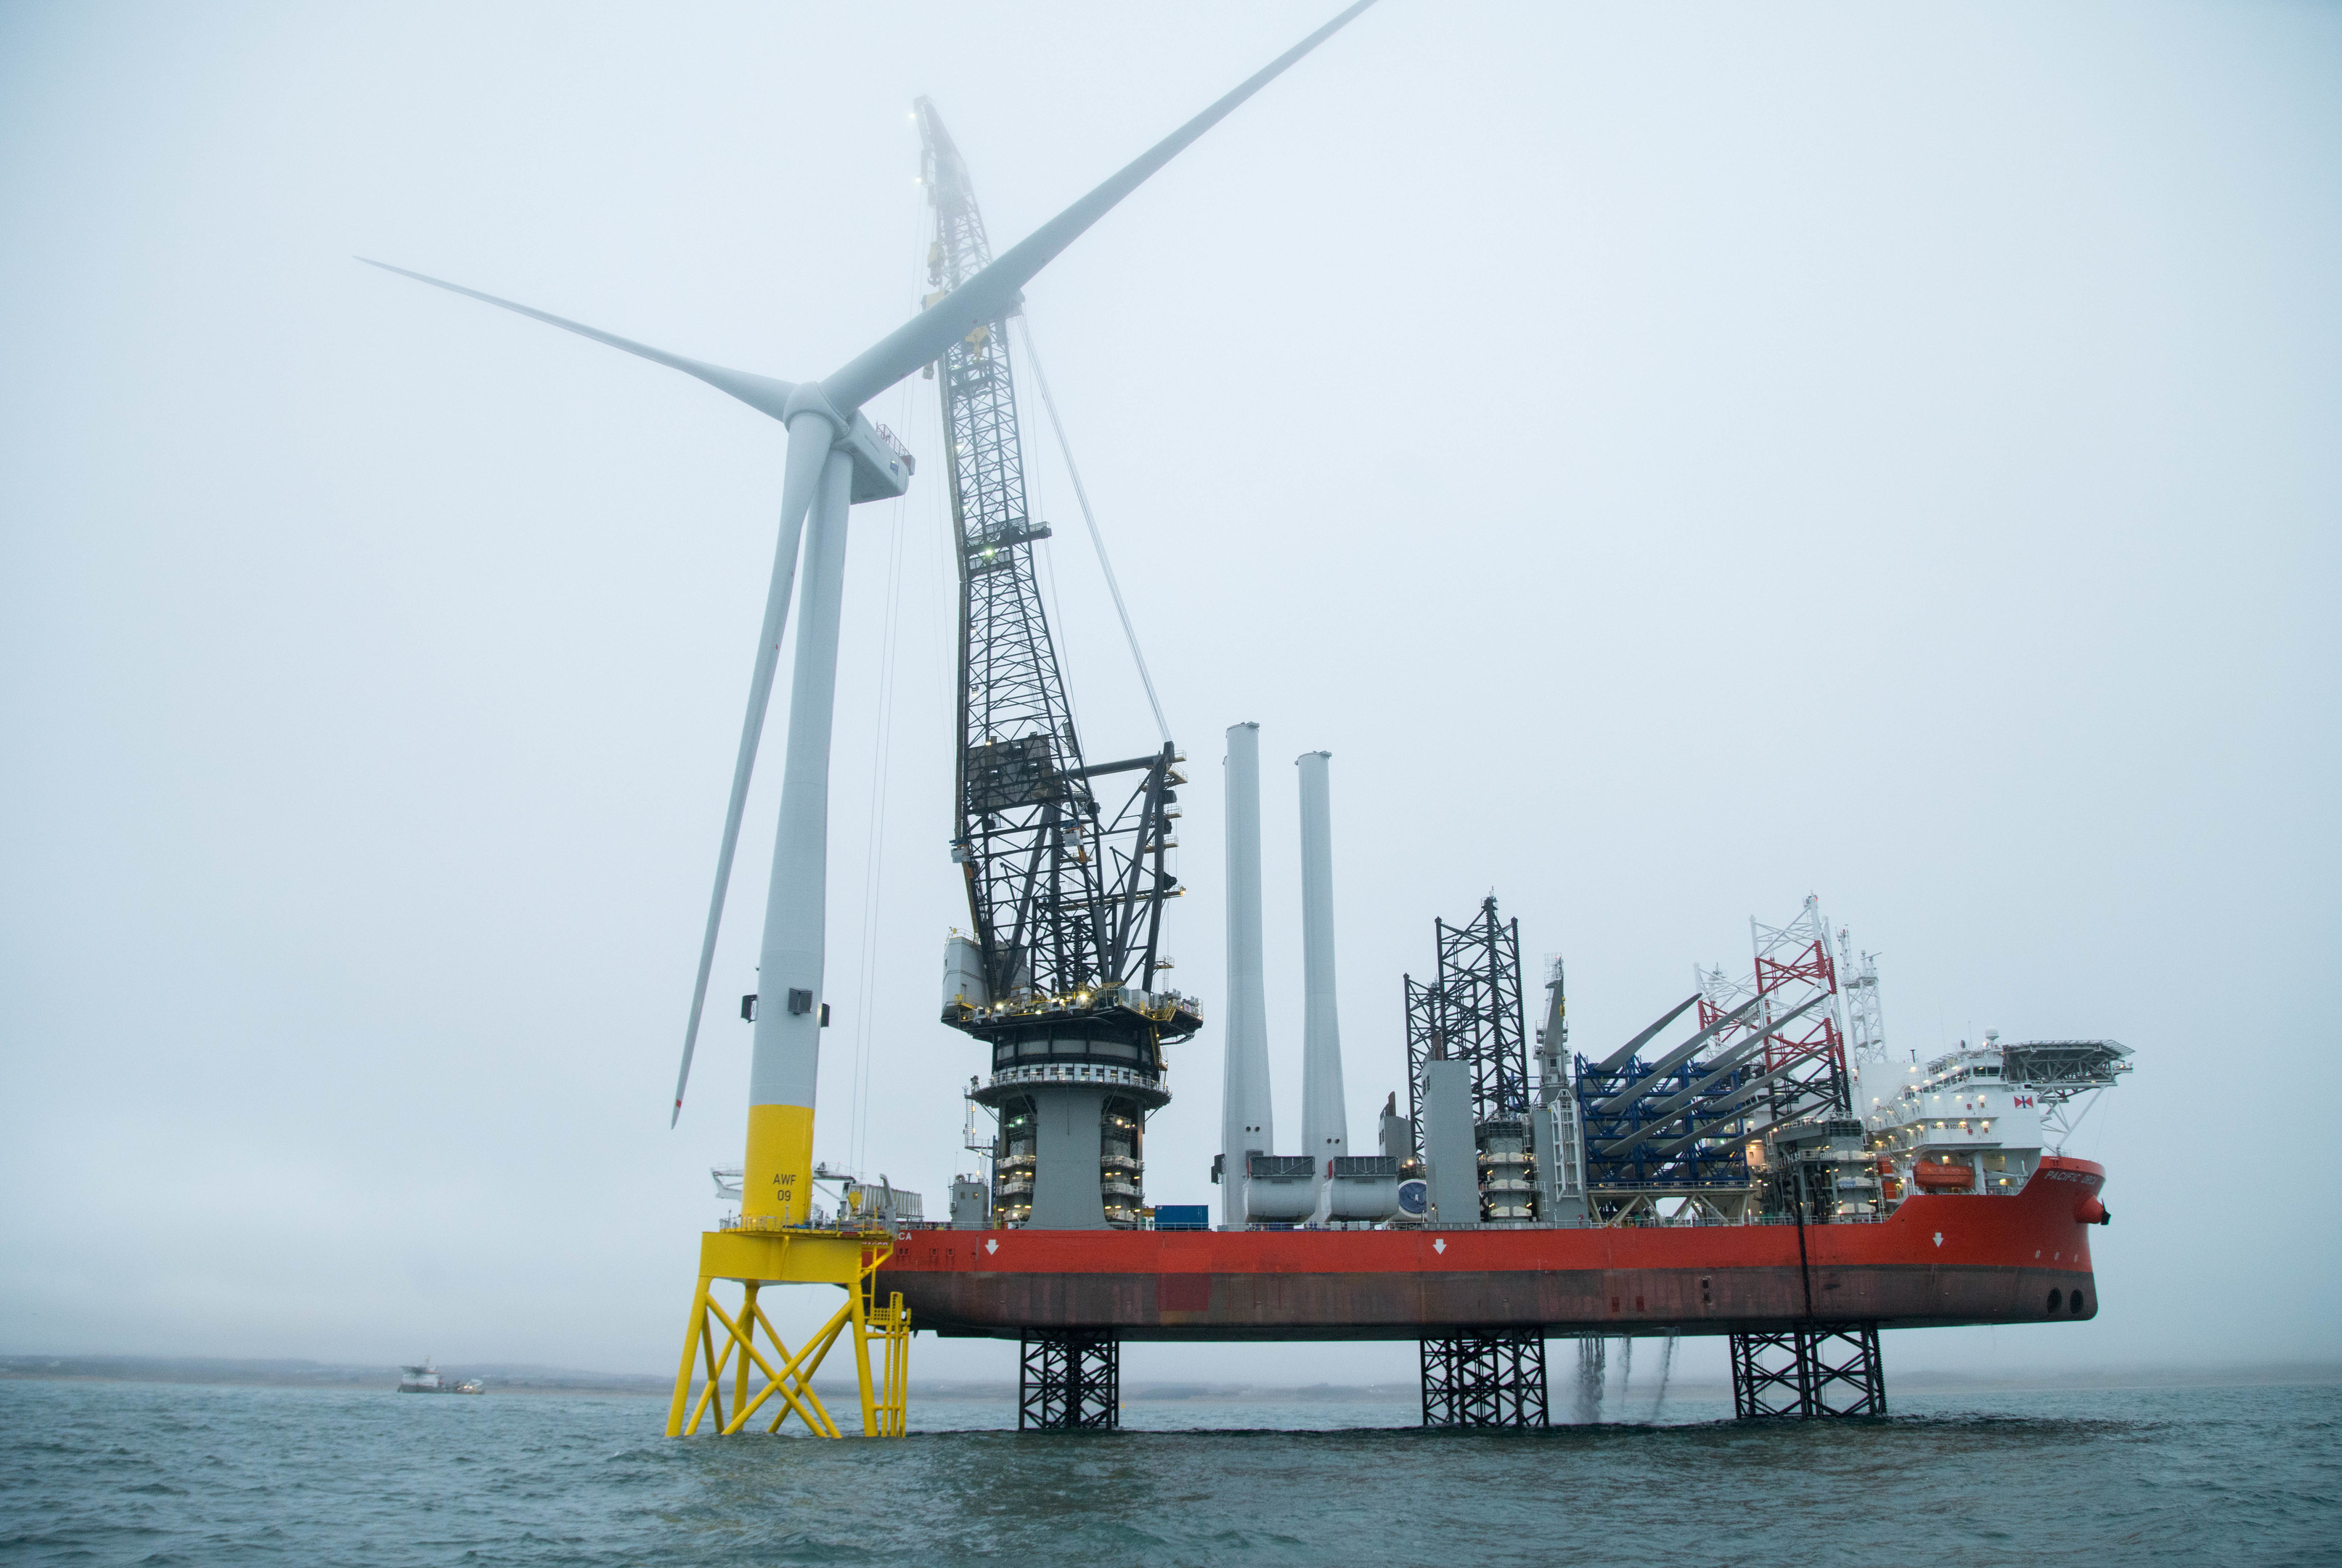 An offshore wind farm being constructed.